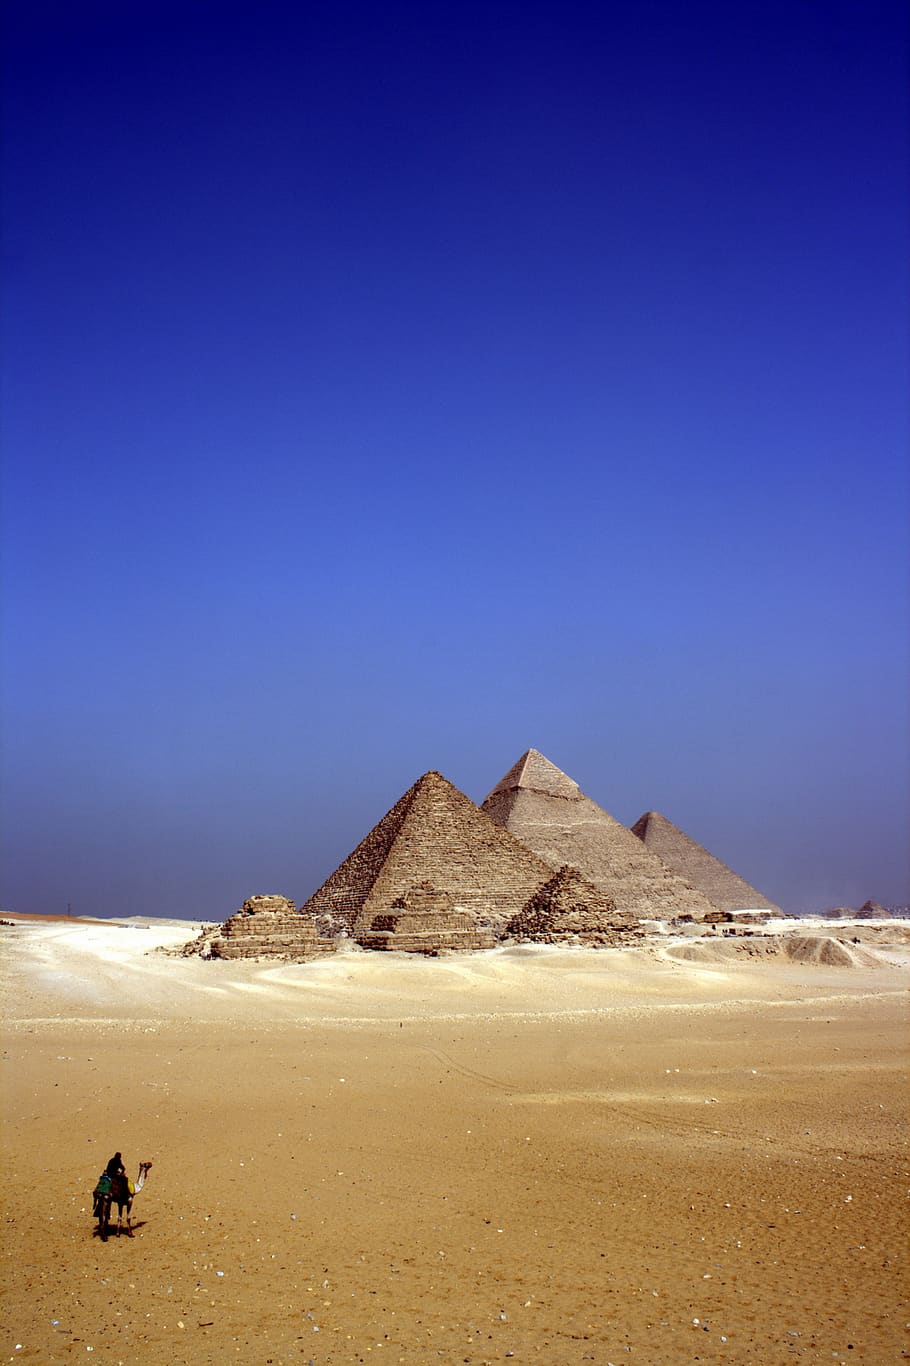 egypt, desert, animals, camels, sand, structures, architecture, pyramid, sky, blue